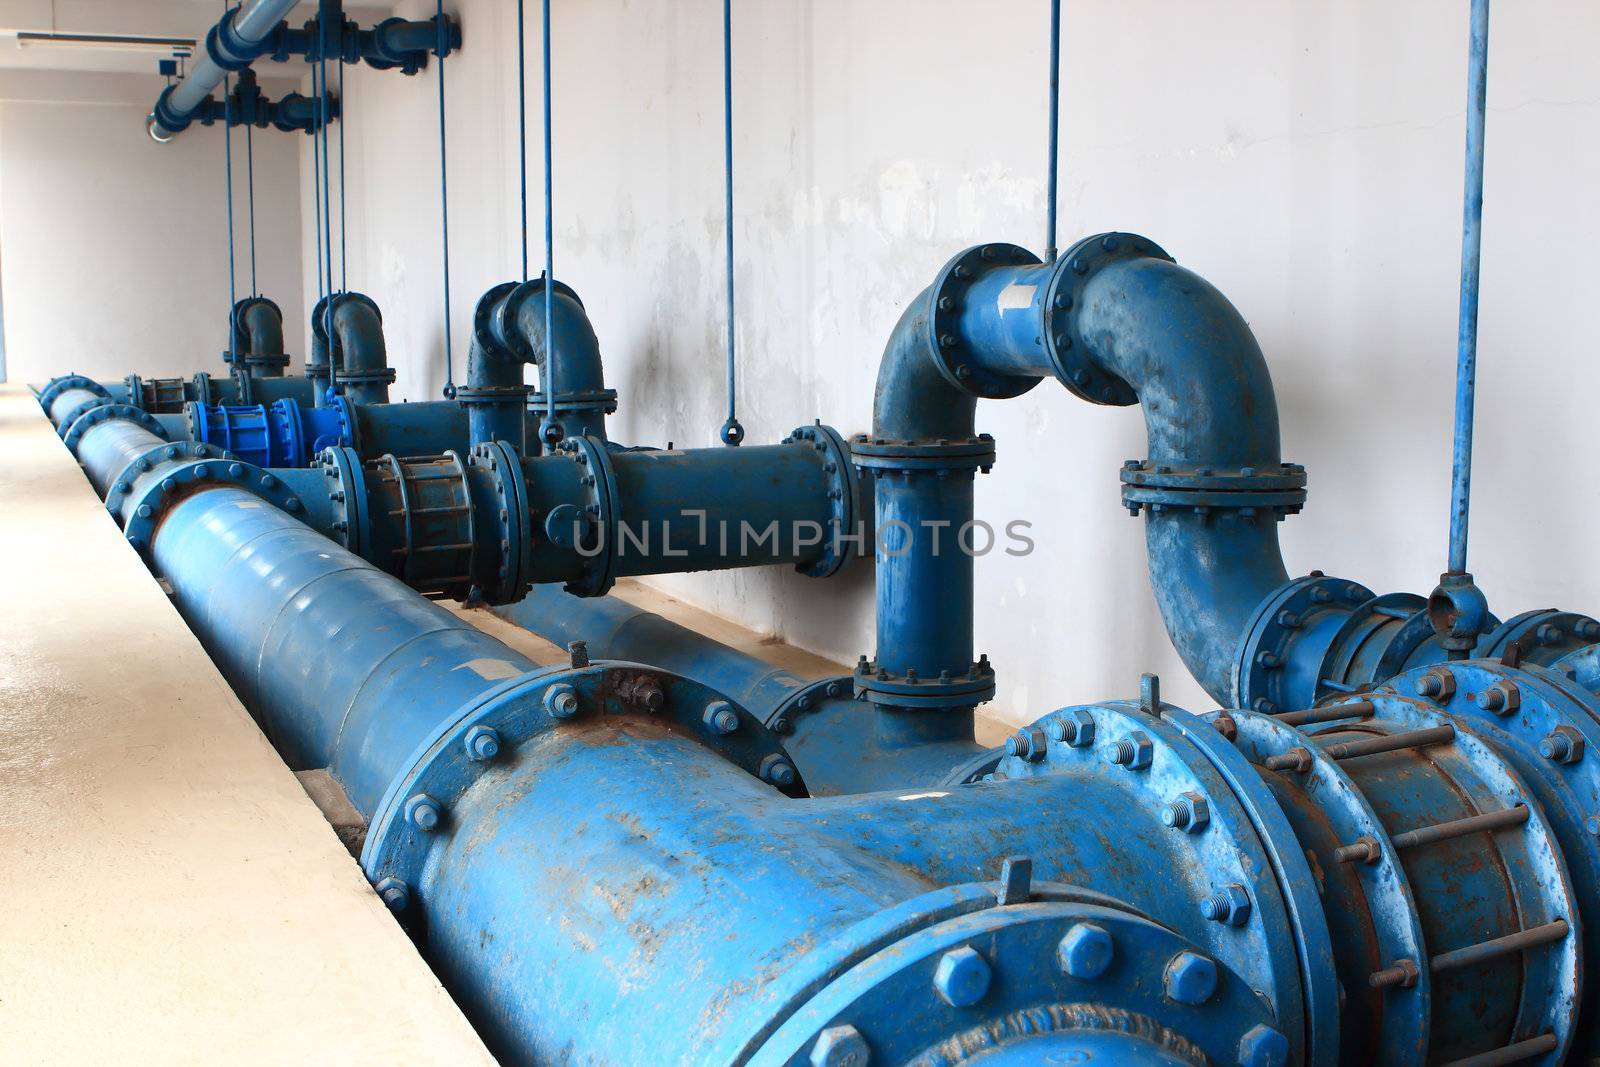 Water pumping station, industrial interior and pipes by rufous